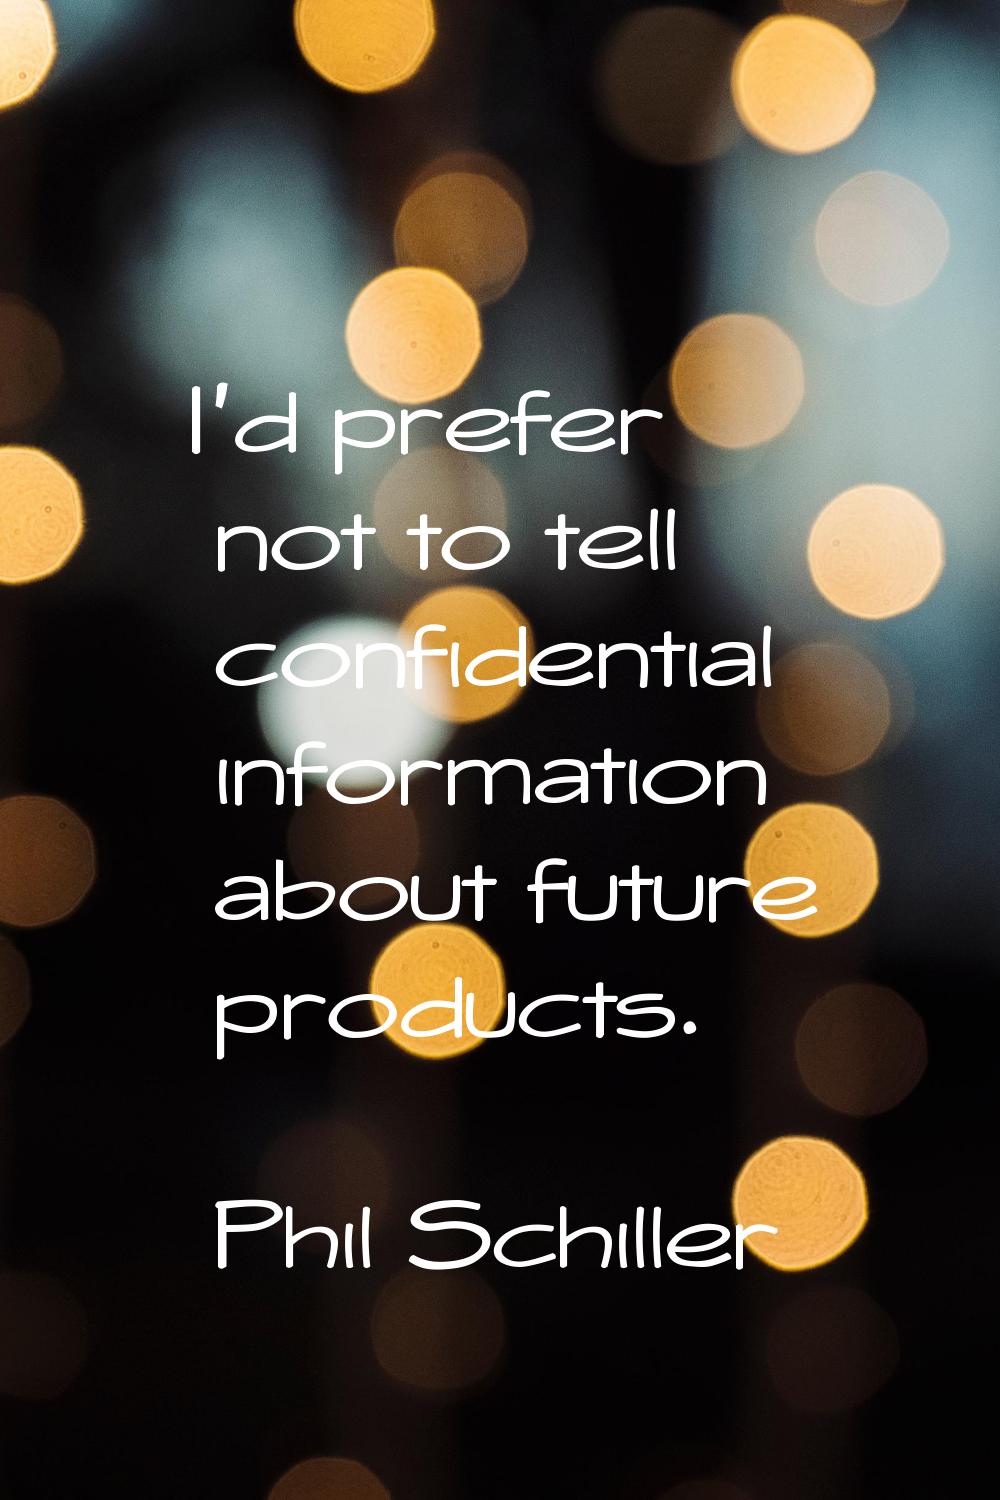 I'd prefer not to tell confidential information about future products.